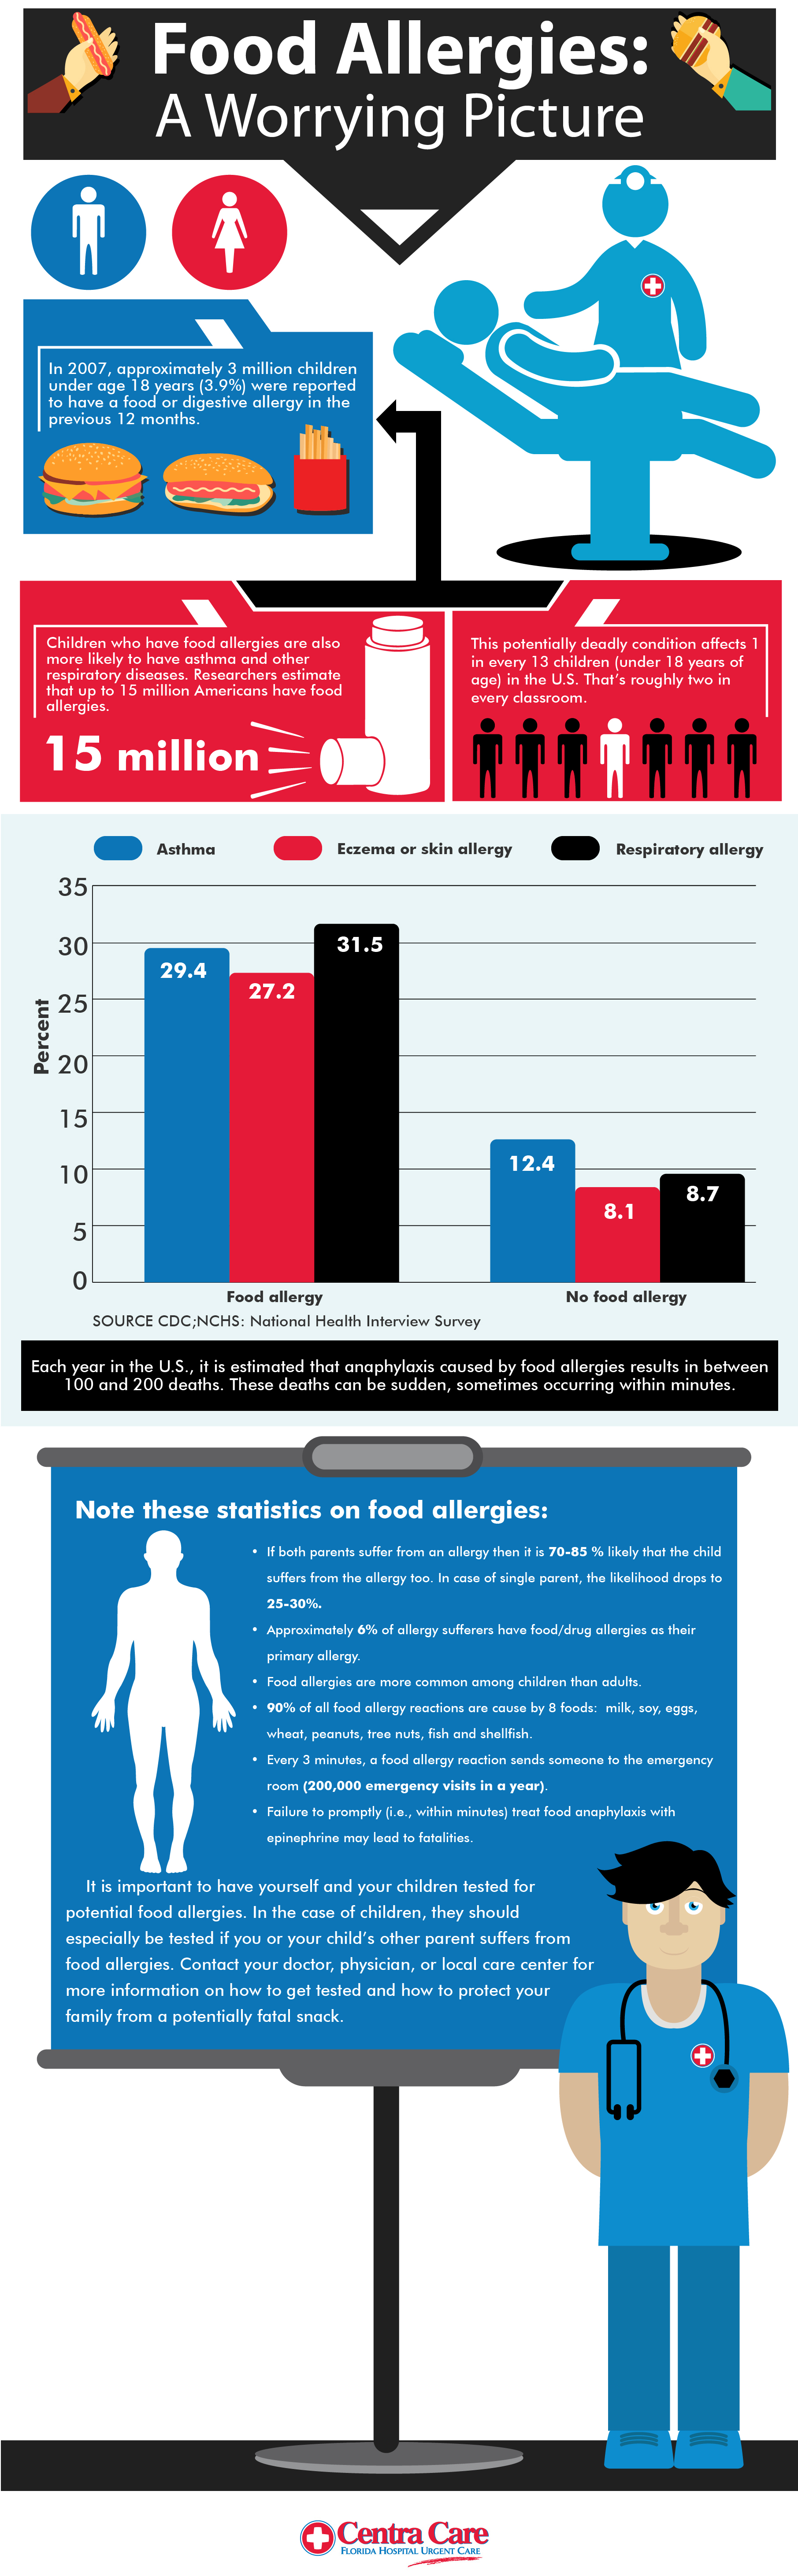 Food Allergies A Worrying Picture